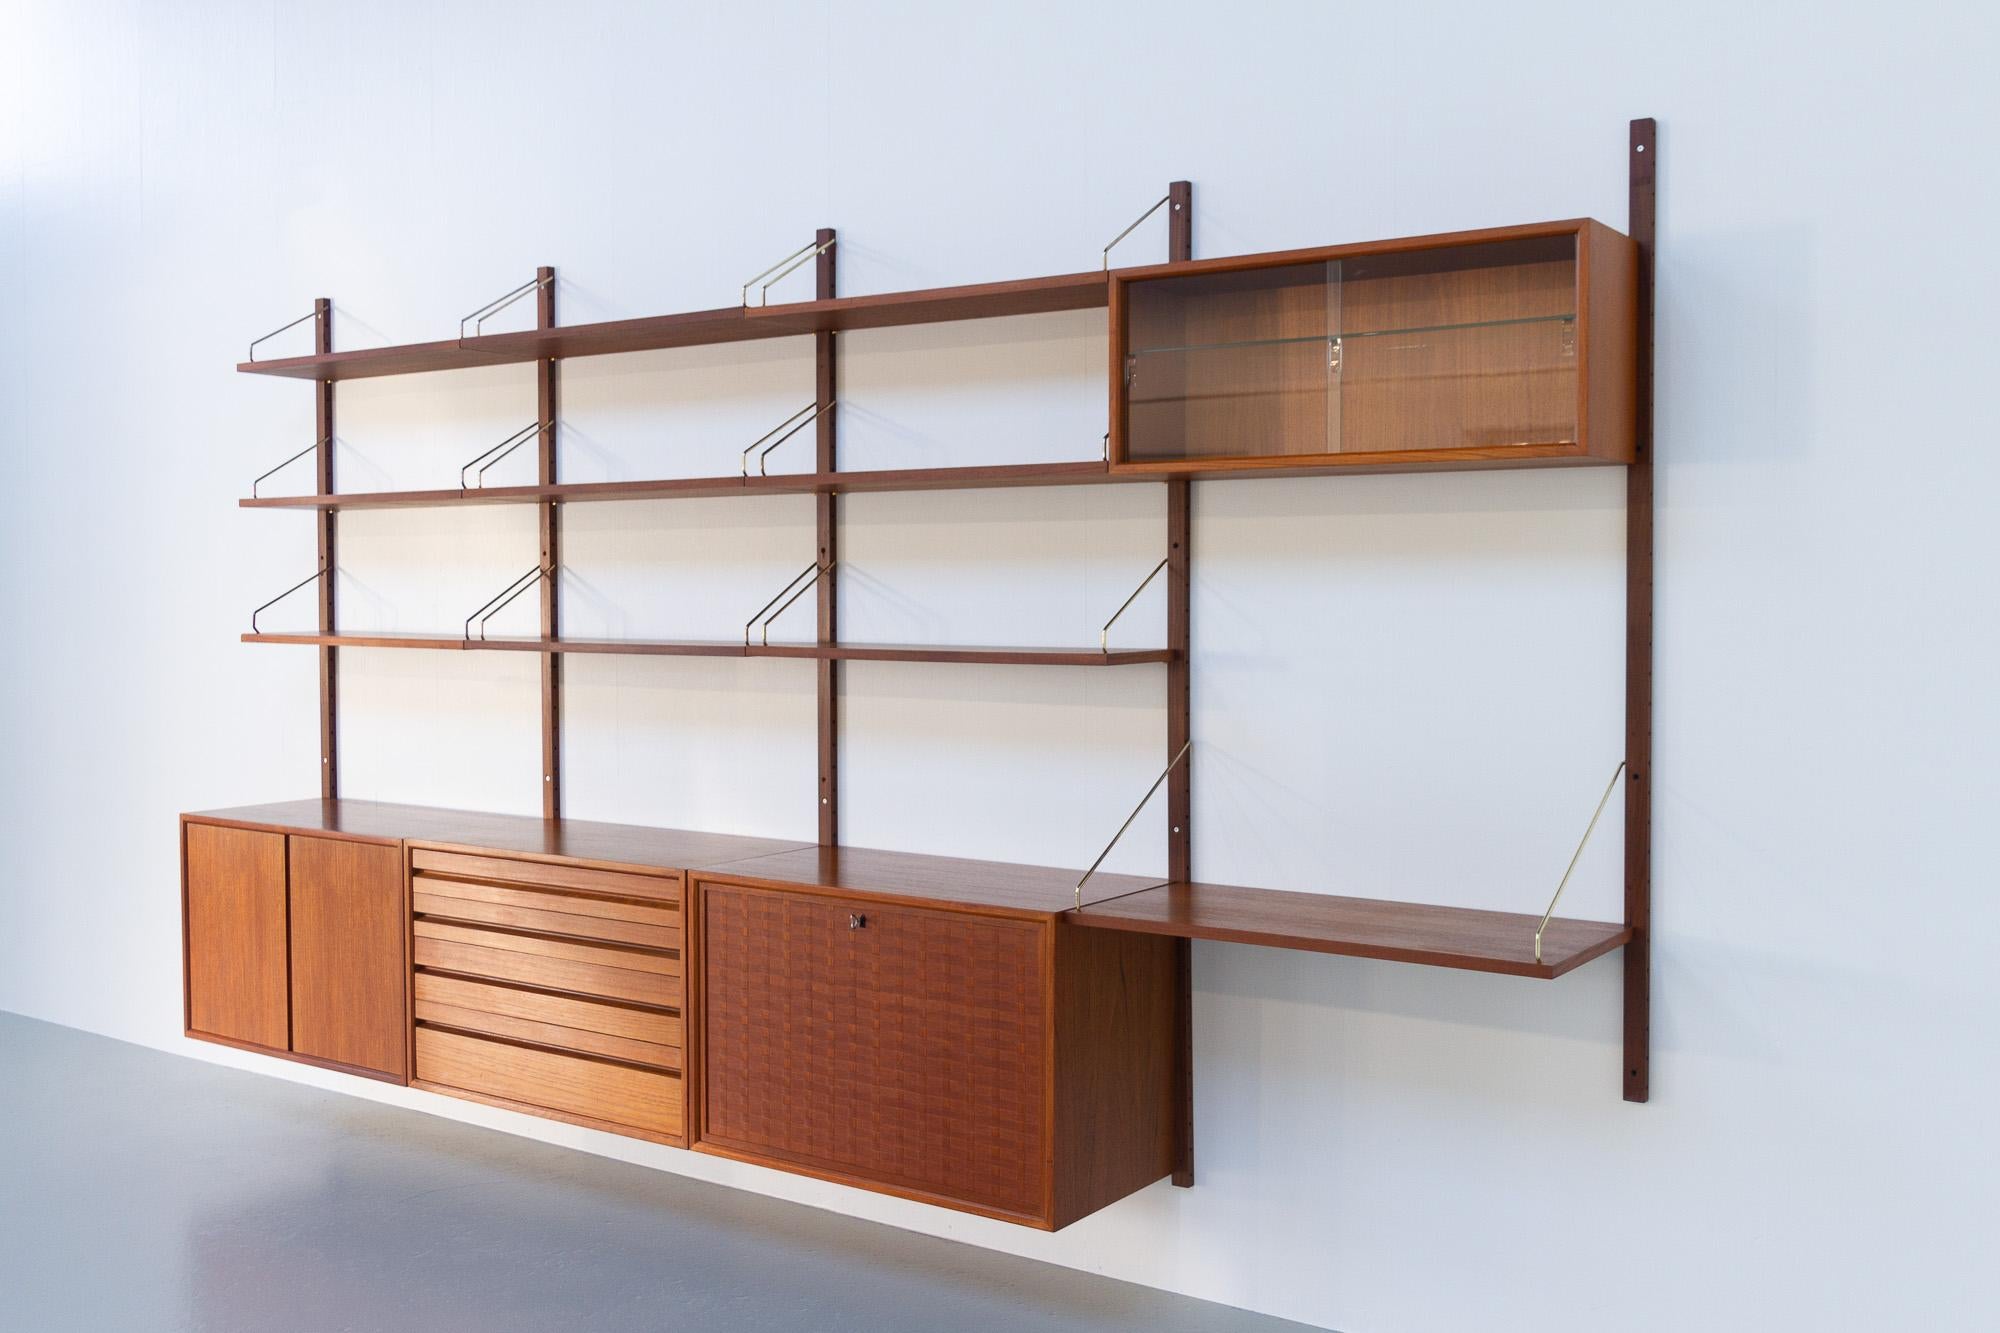 Vintage Danish teak wall unit by Poul Cadovius for Cado, 1960s.

Mid-Century Modern 4 bay shelving system model Royal. This is a original vintage floating bookcase designed in 1948 by Danish architect Poul Cadovius. 
Cadovius had the revolutionary